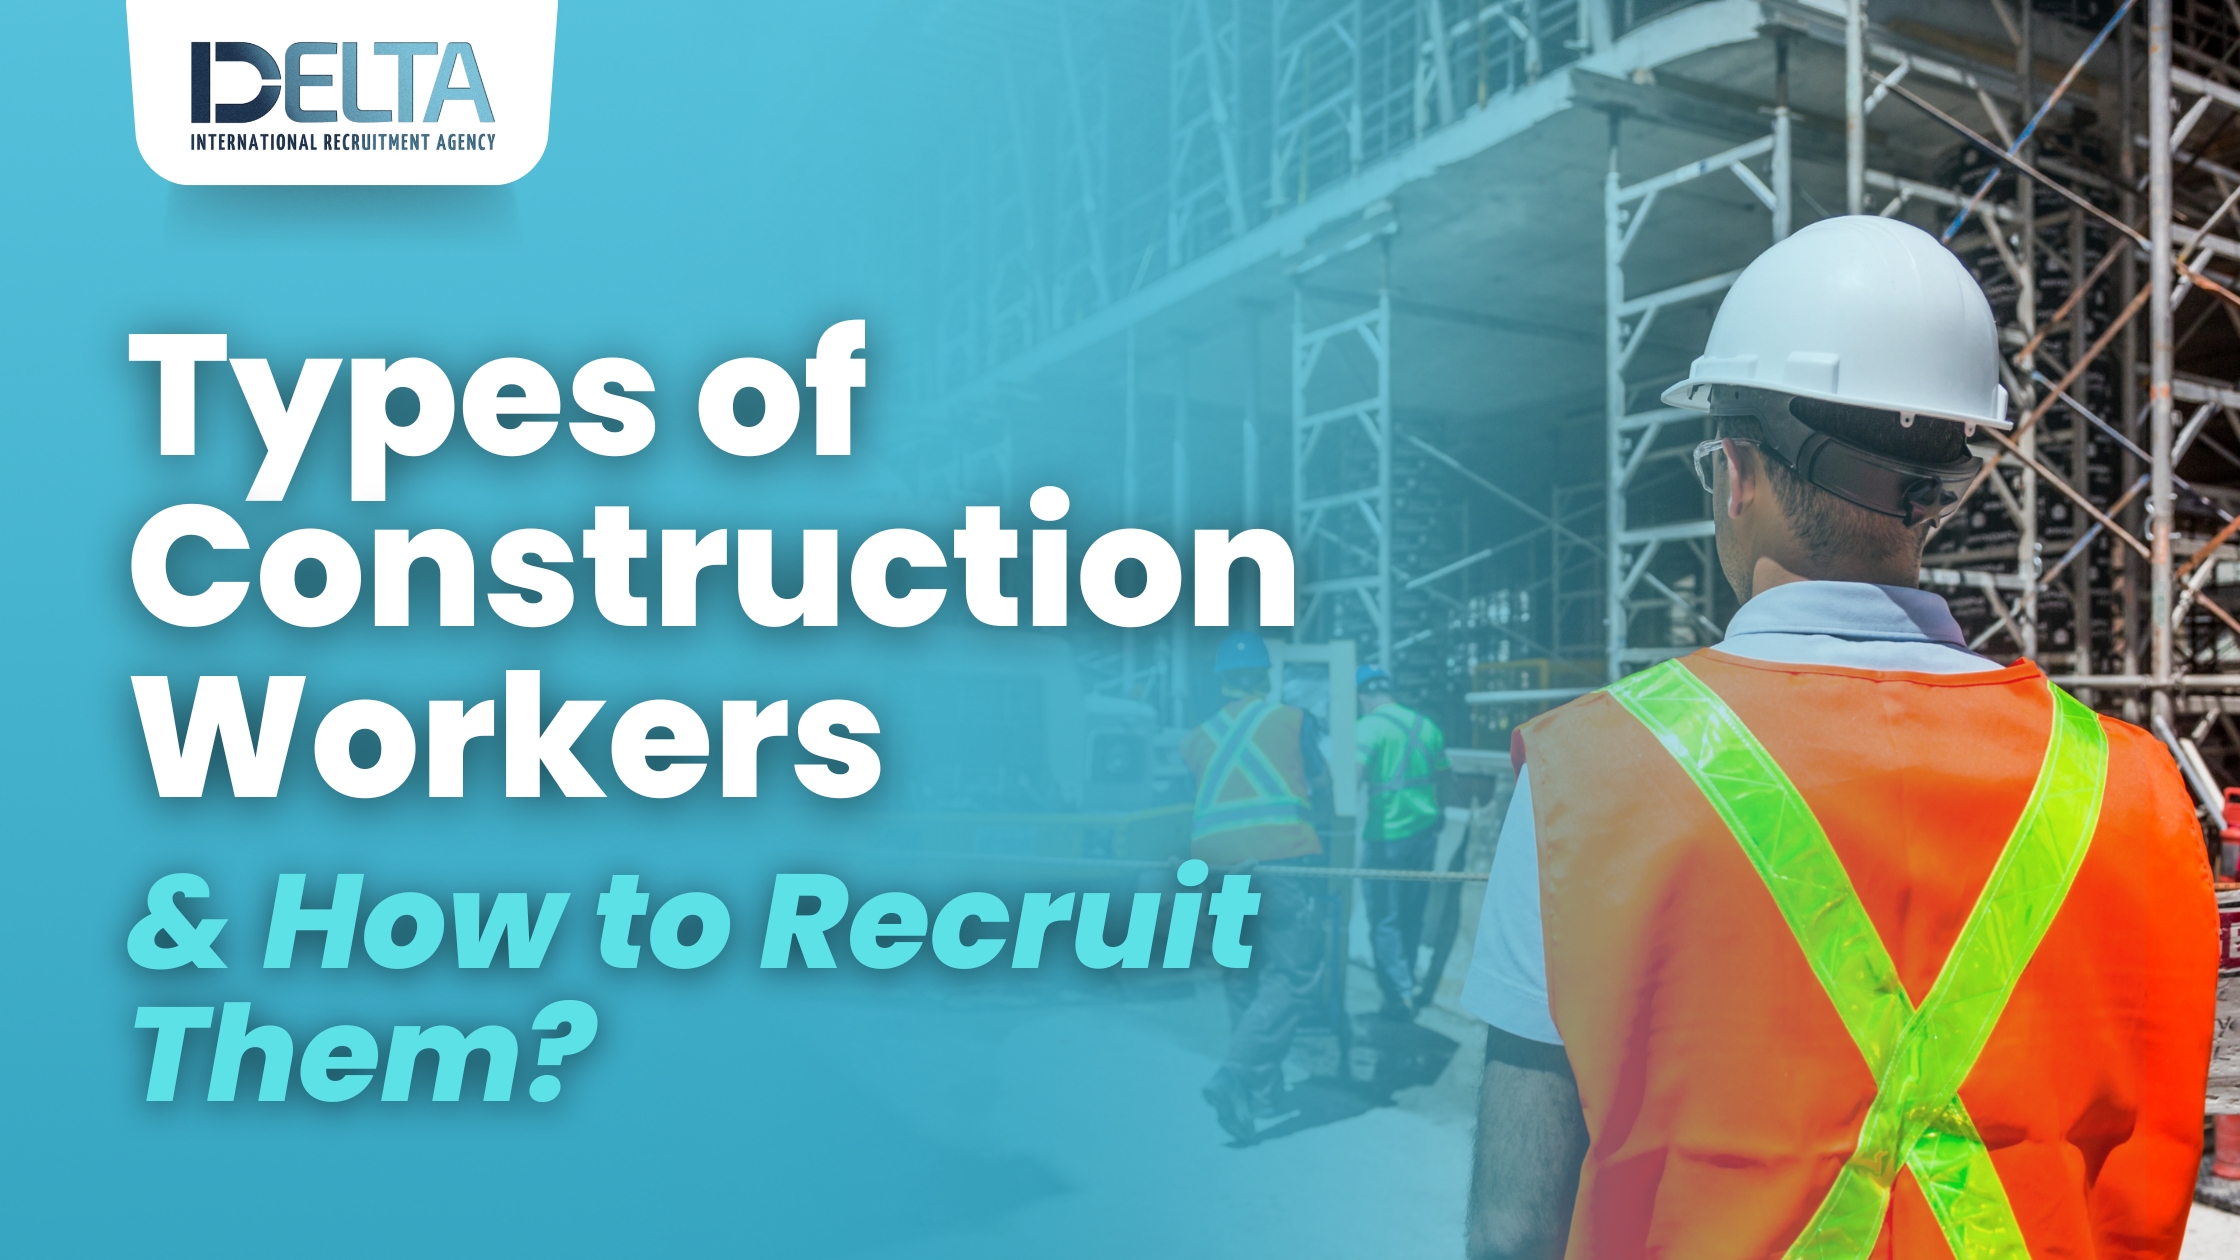 Types of Construction Workers & How to Recruit Them?